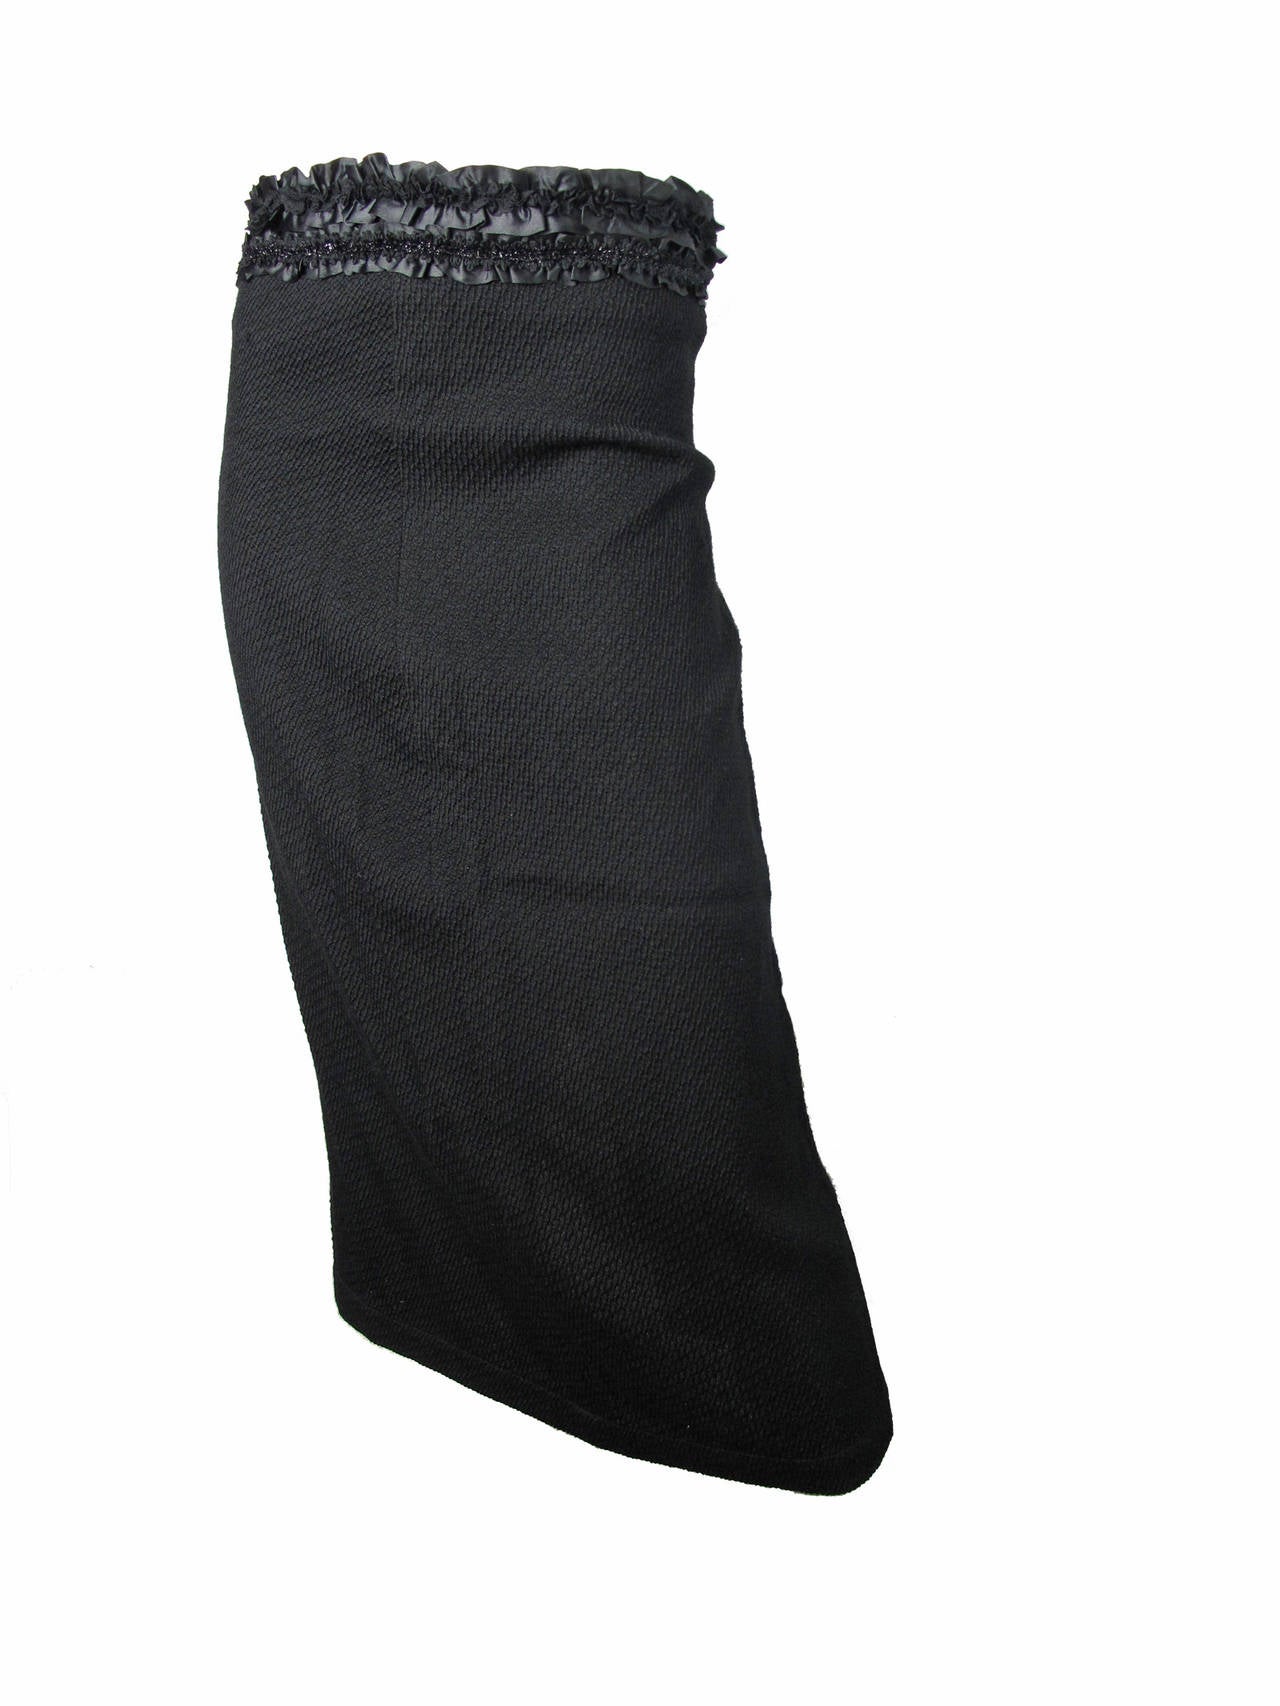 Comme des Garcons black wool skirt with embellished waistband c. 2008. 32